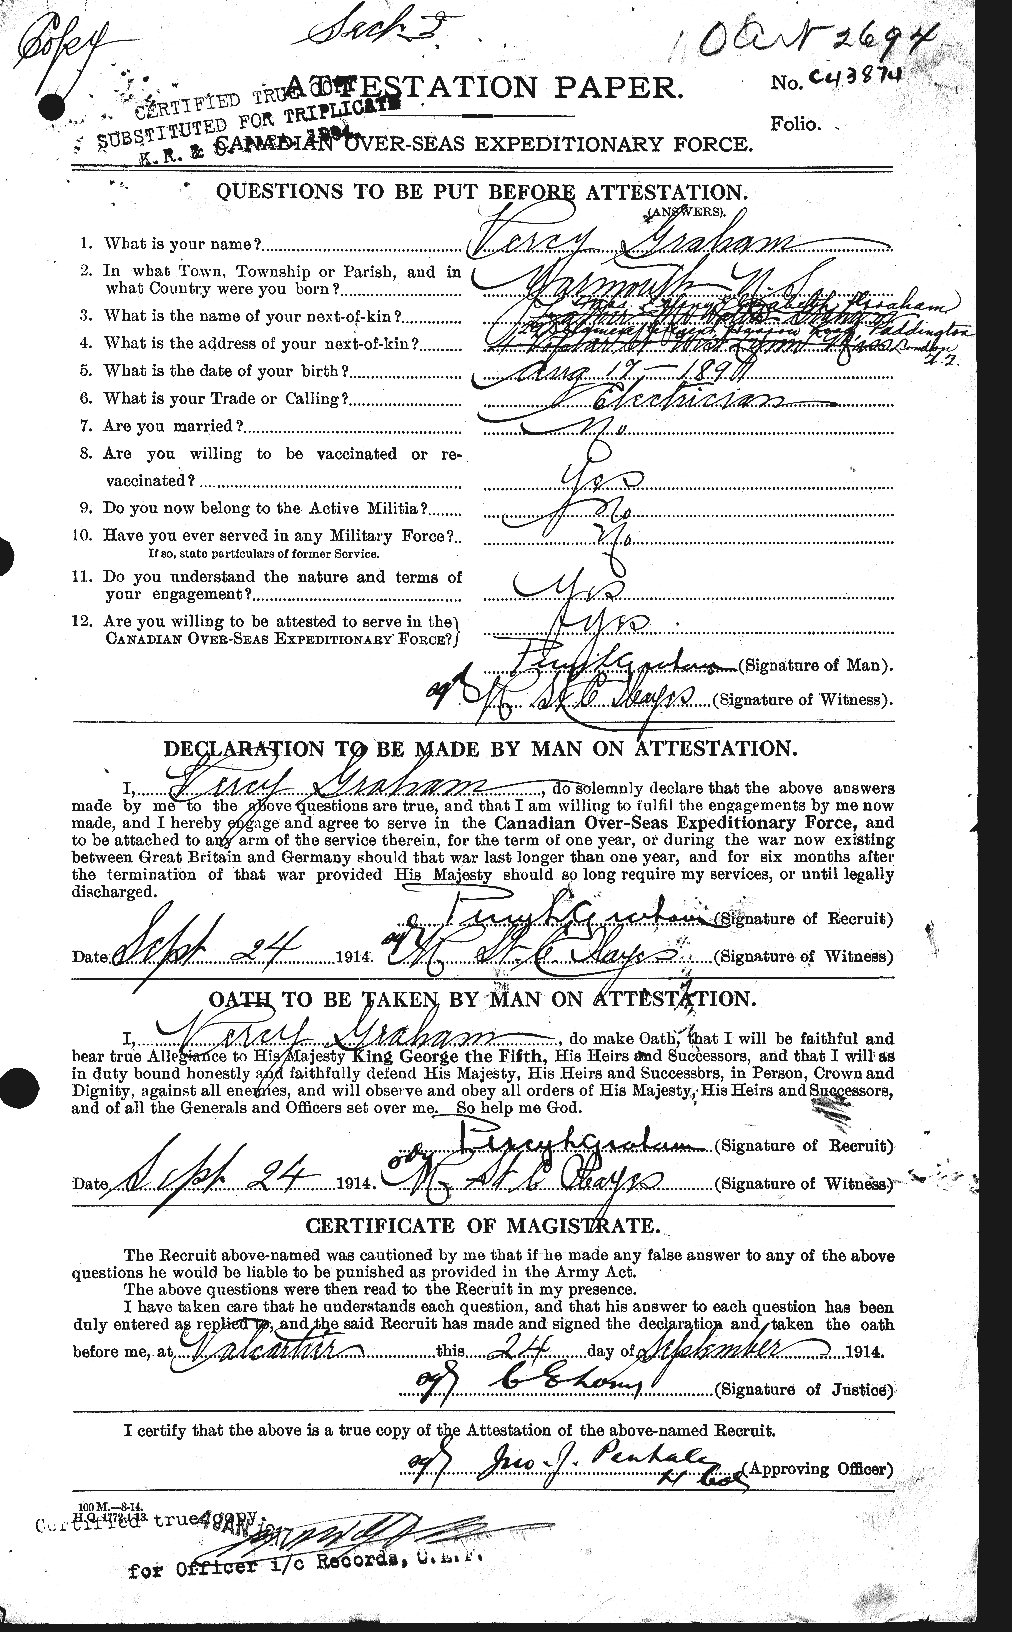 Personnel Records of the First World War - CEF 359339a